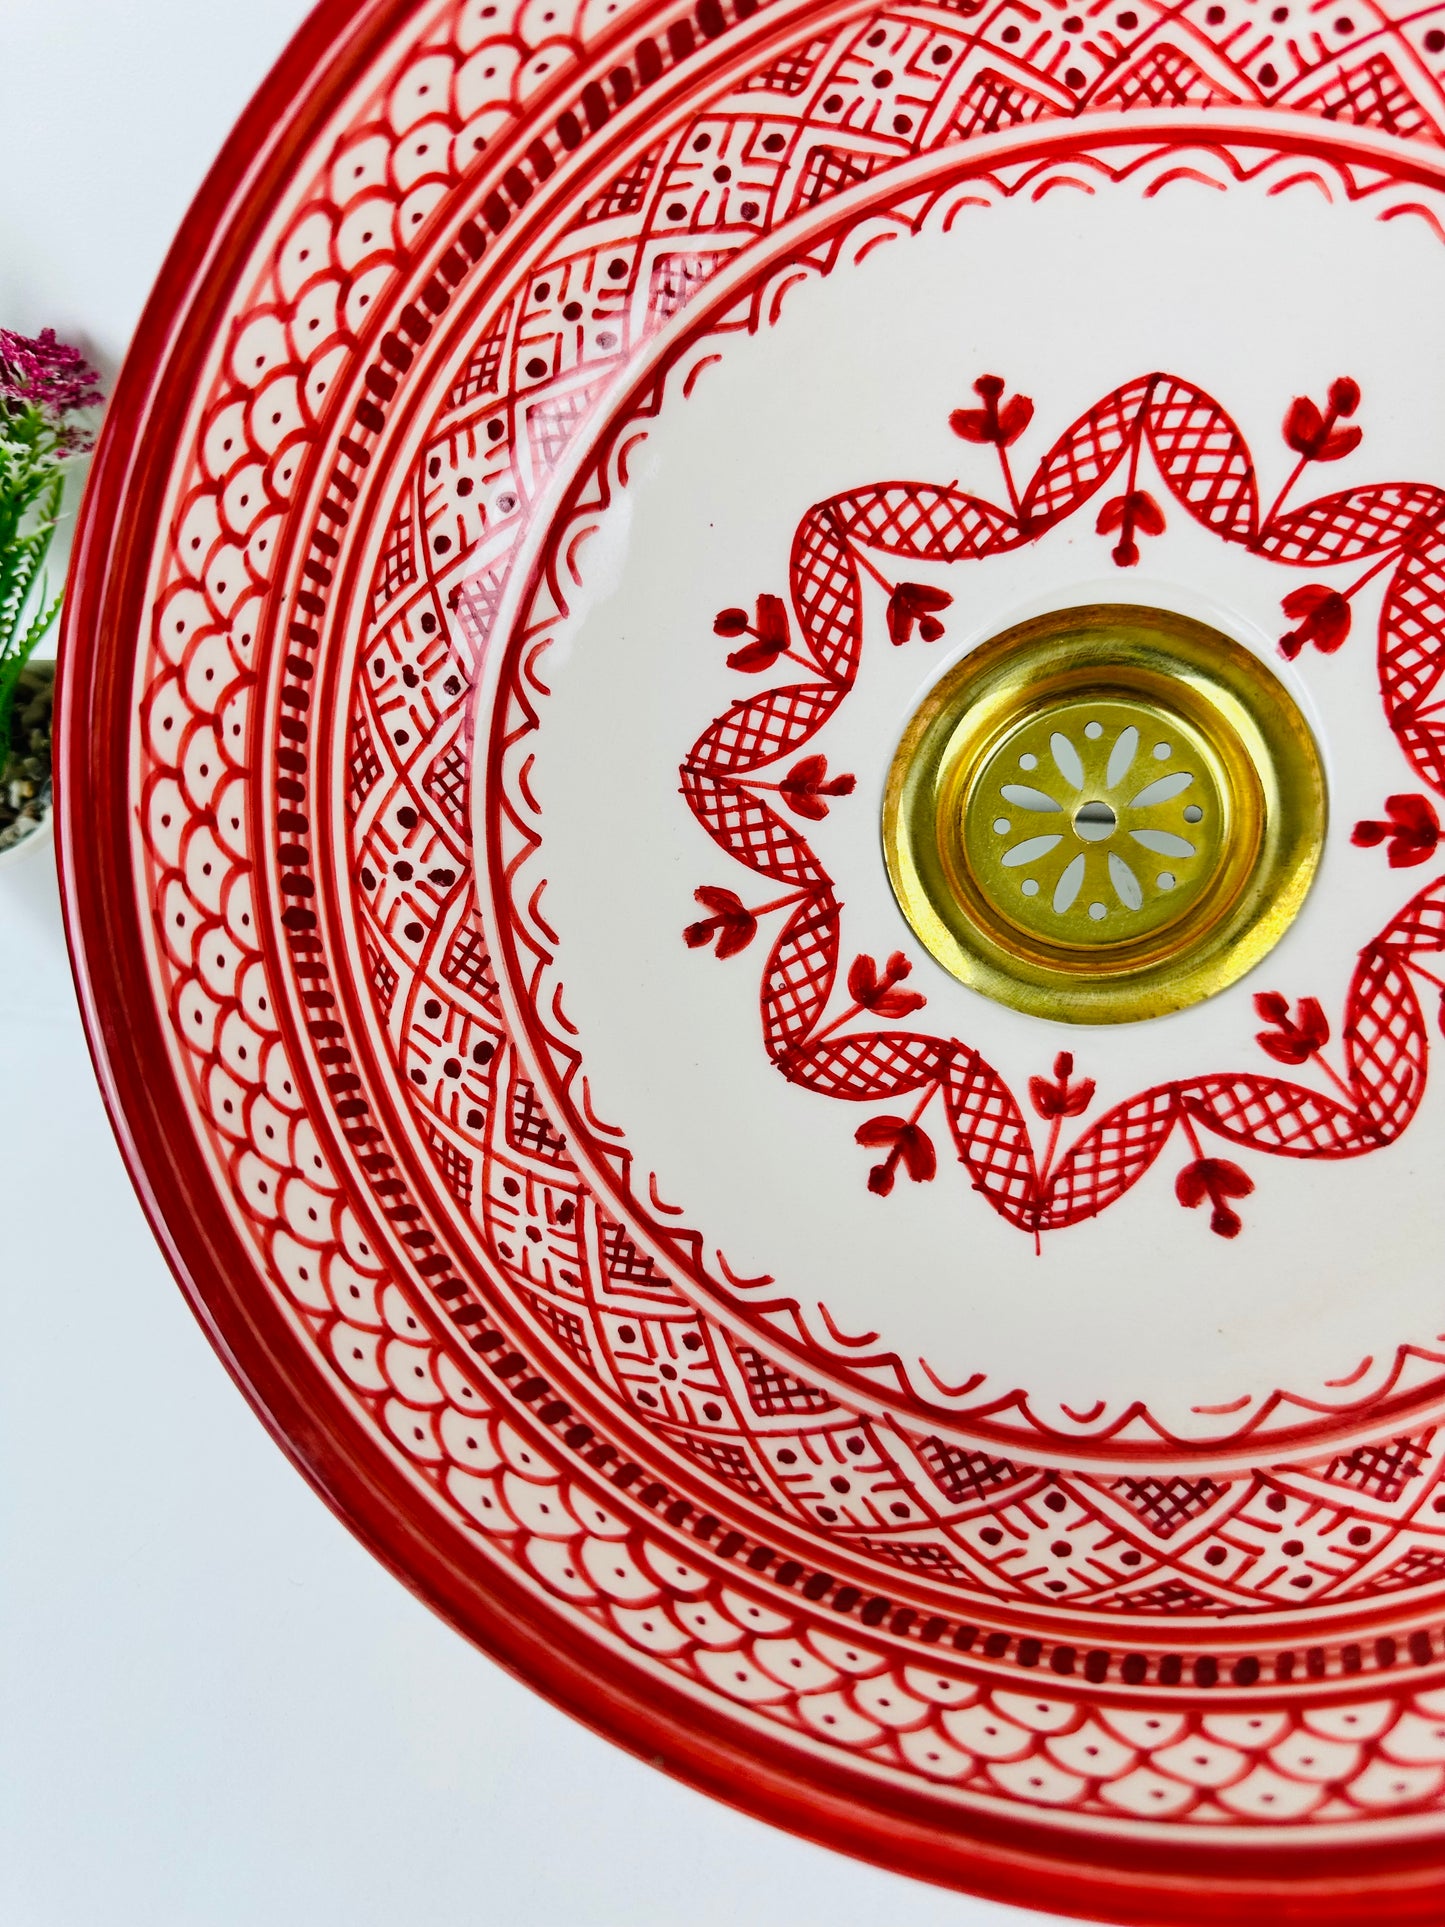 Fiery Rouge: Handcrafted Ceramic Sink in Vibrant Red